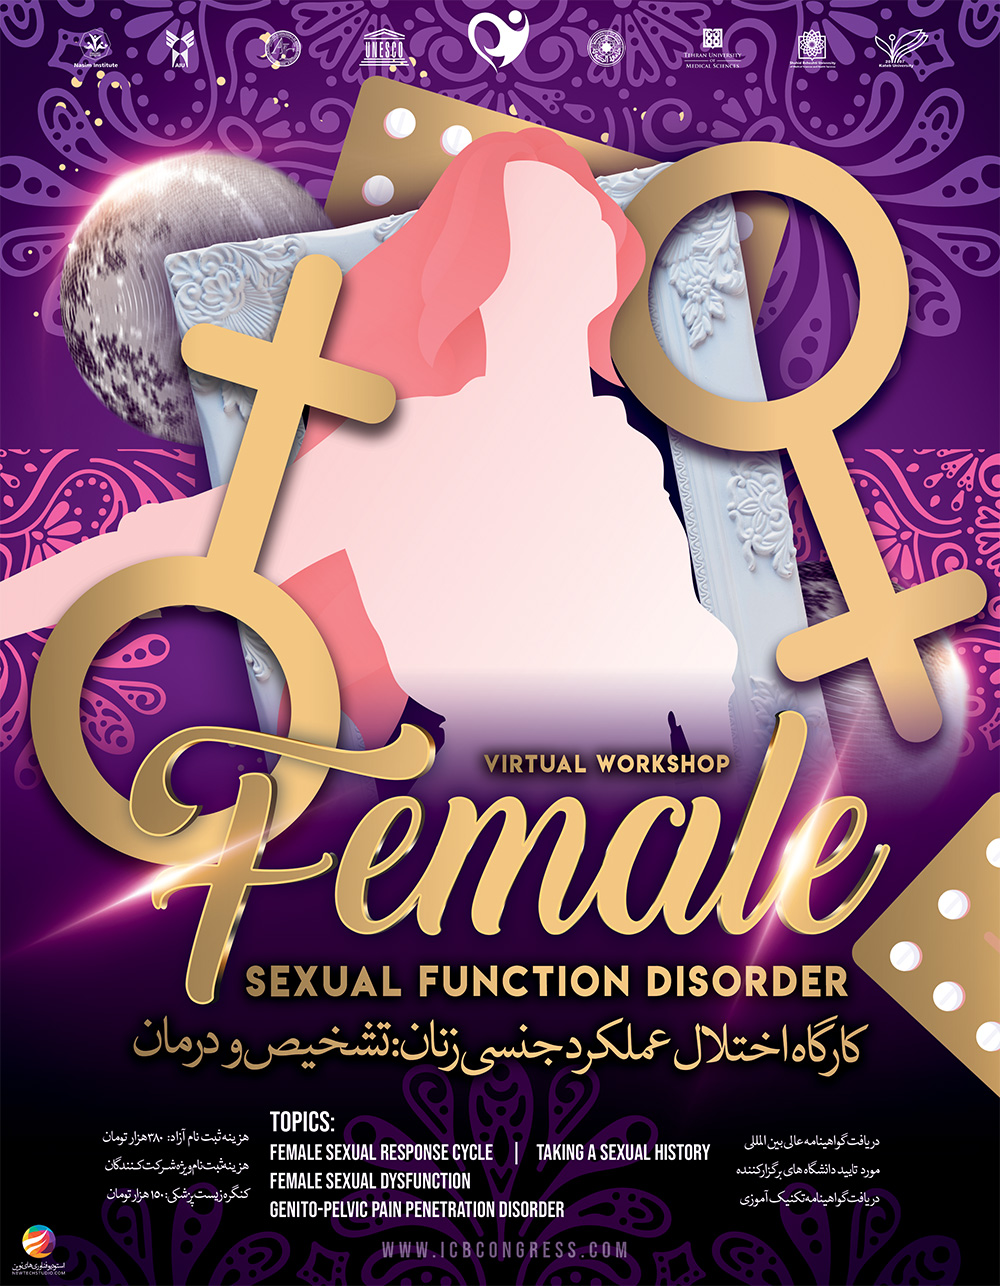 Female sexual function disorder: Diagnosis and treatment